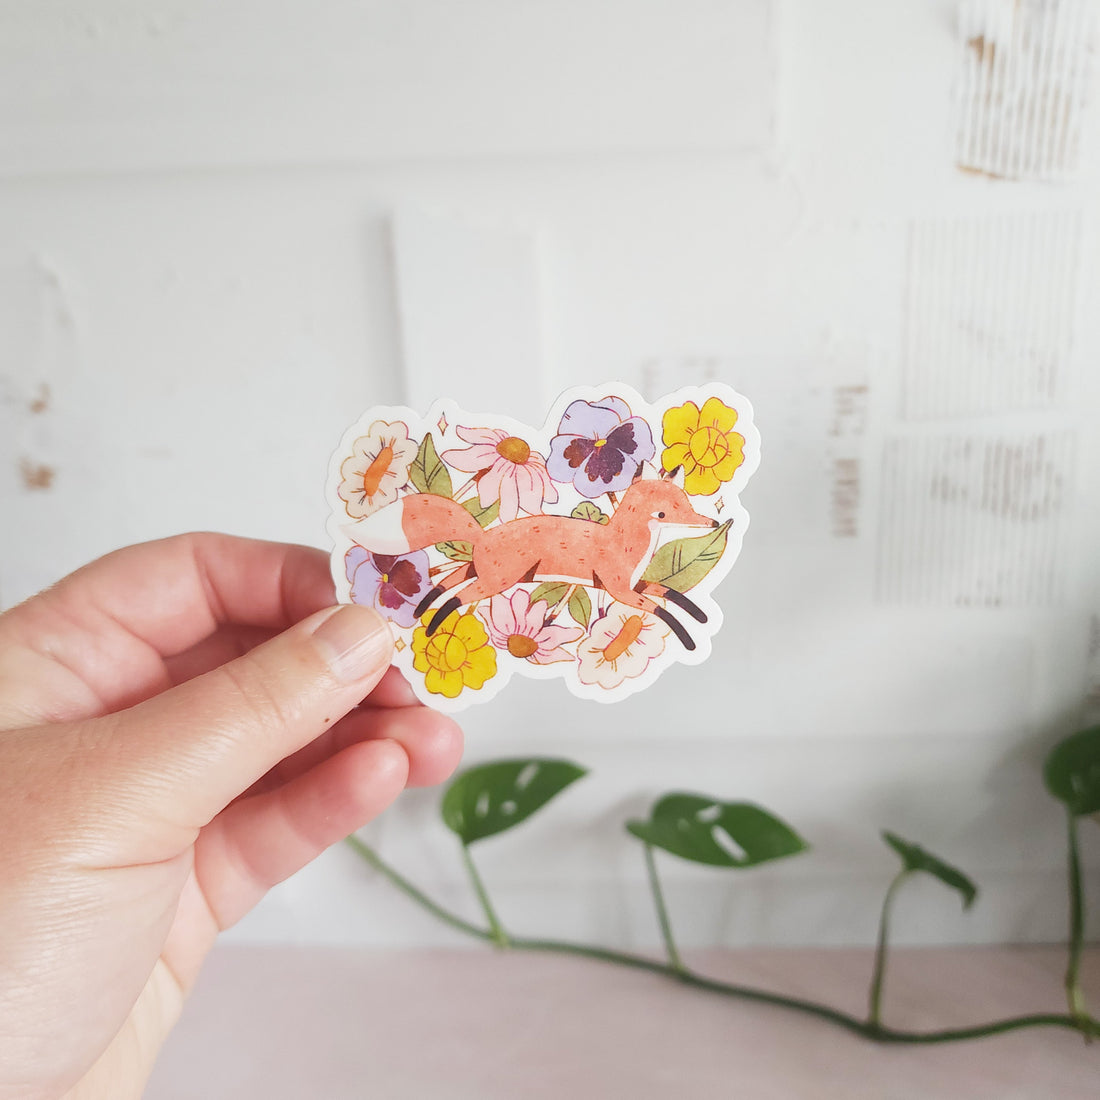 vinyl sticker with a fox jumping through blooming flowers